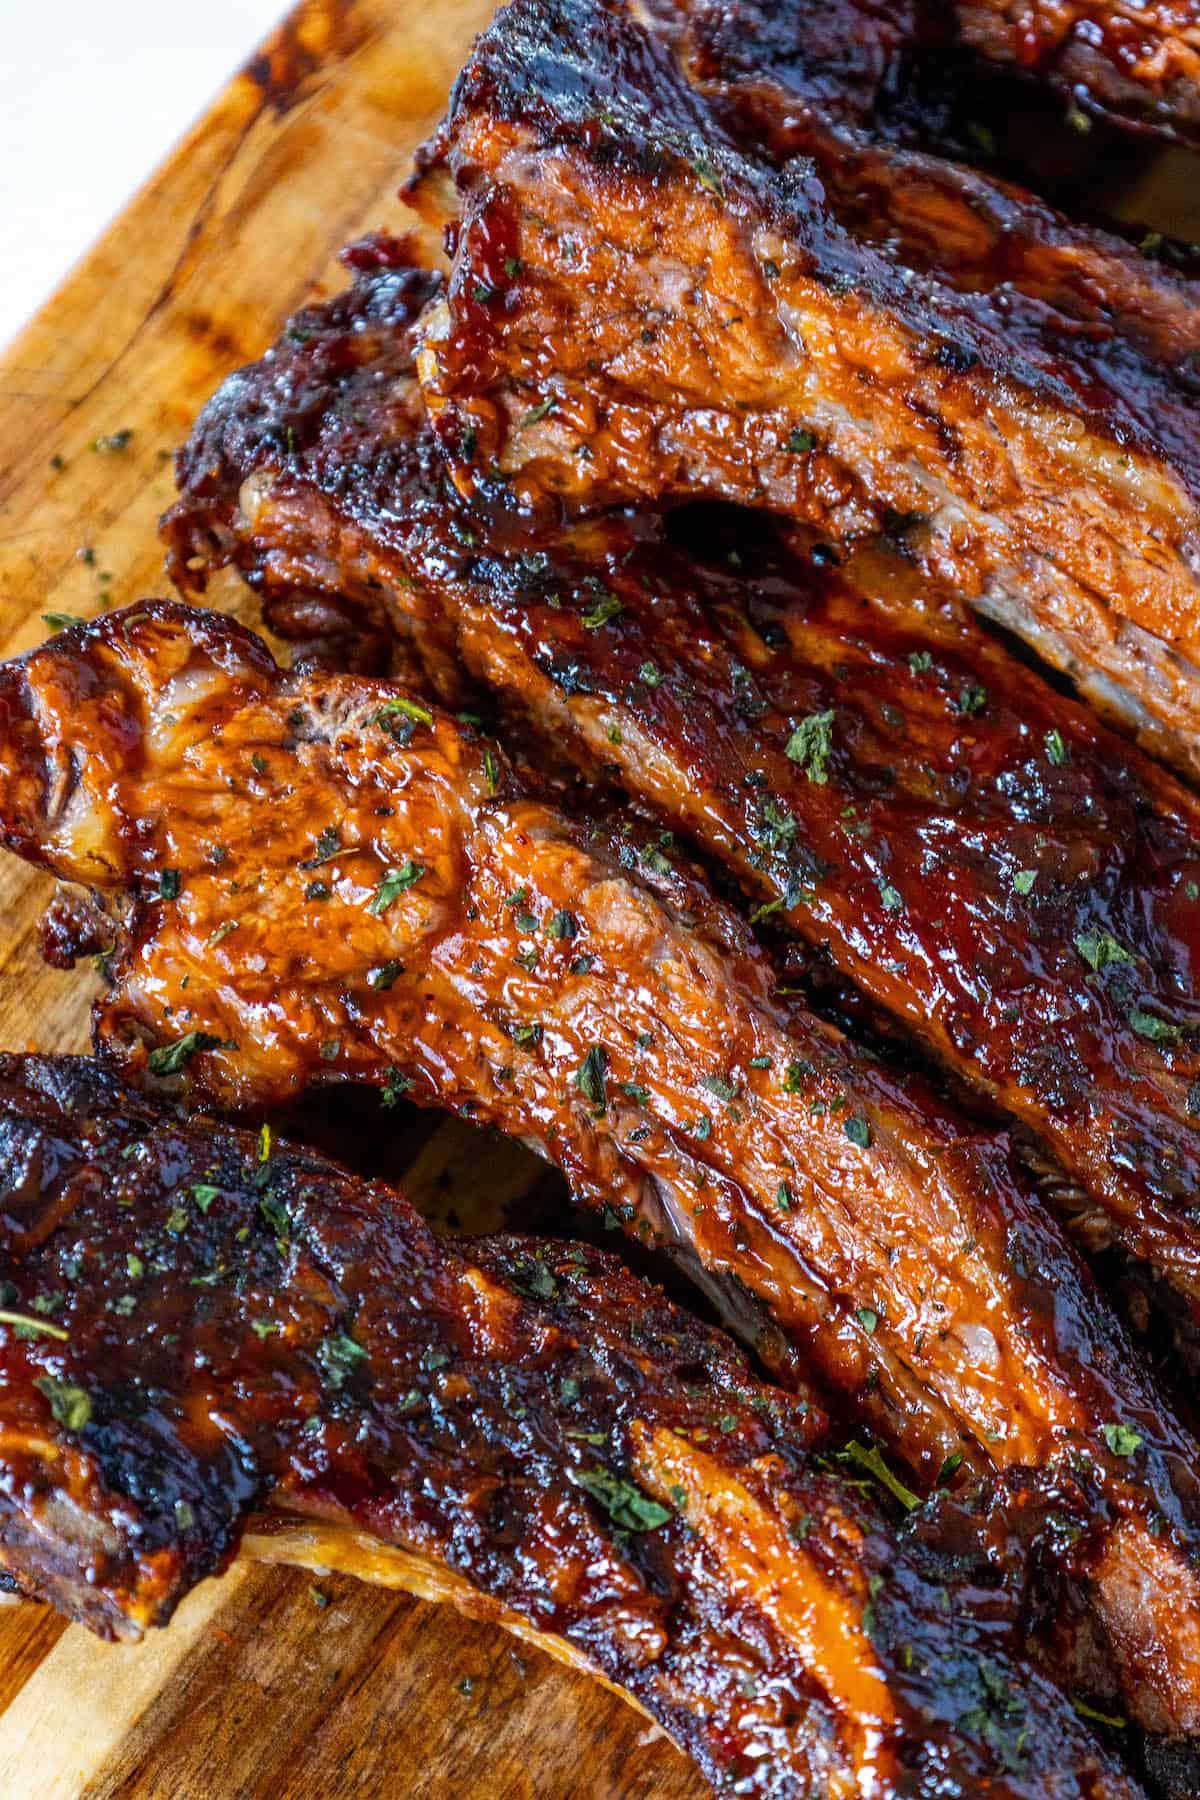 Oven baked beef ribs on a wooden cutting board.